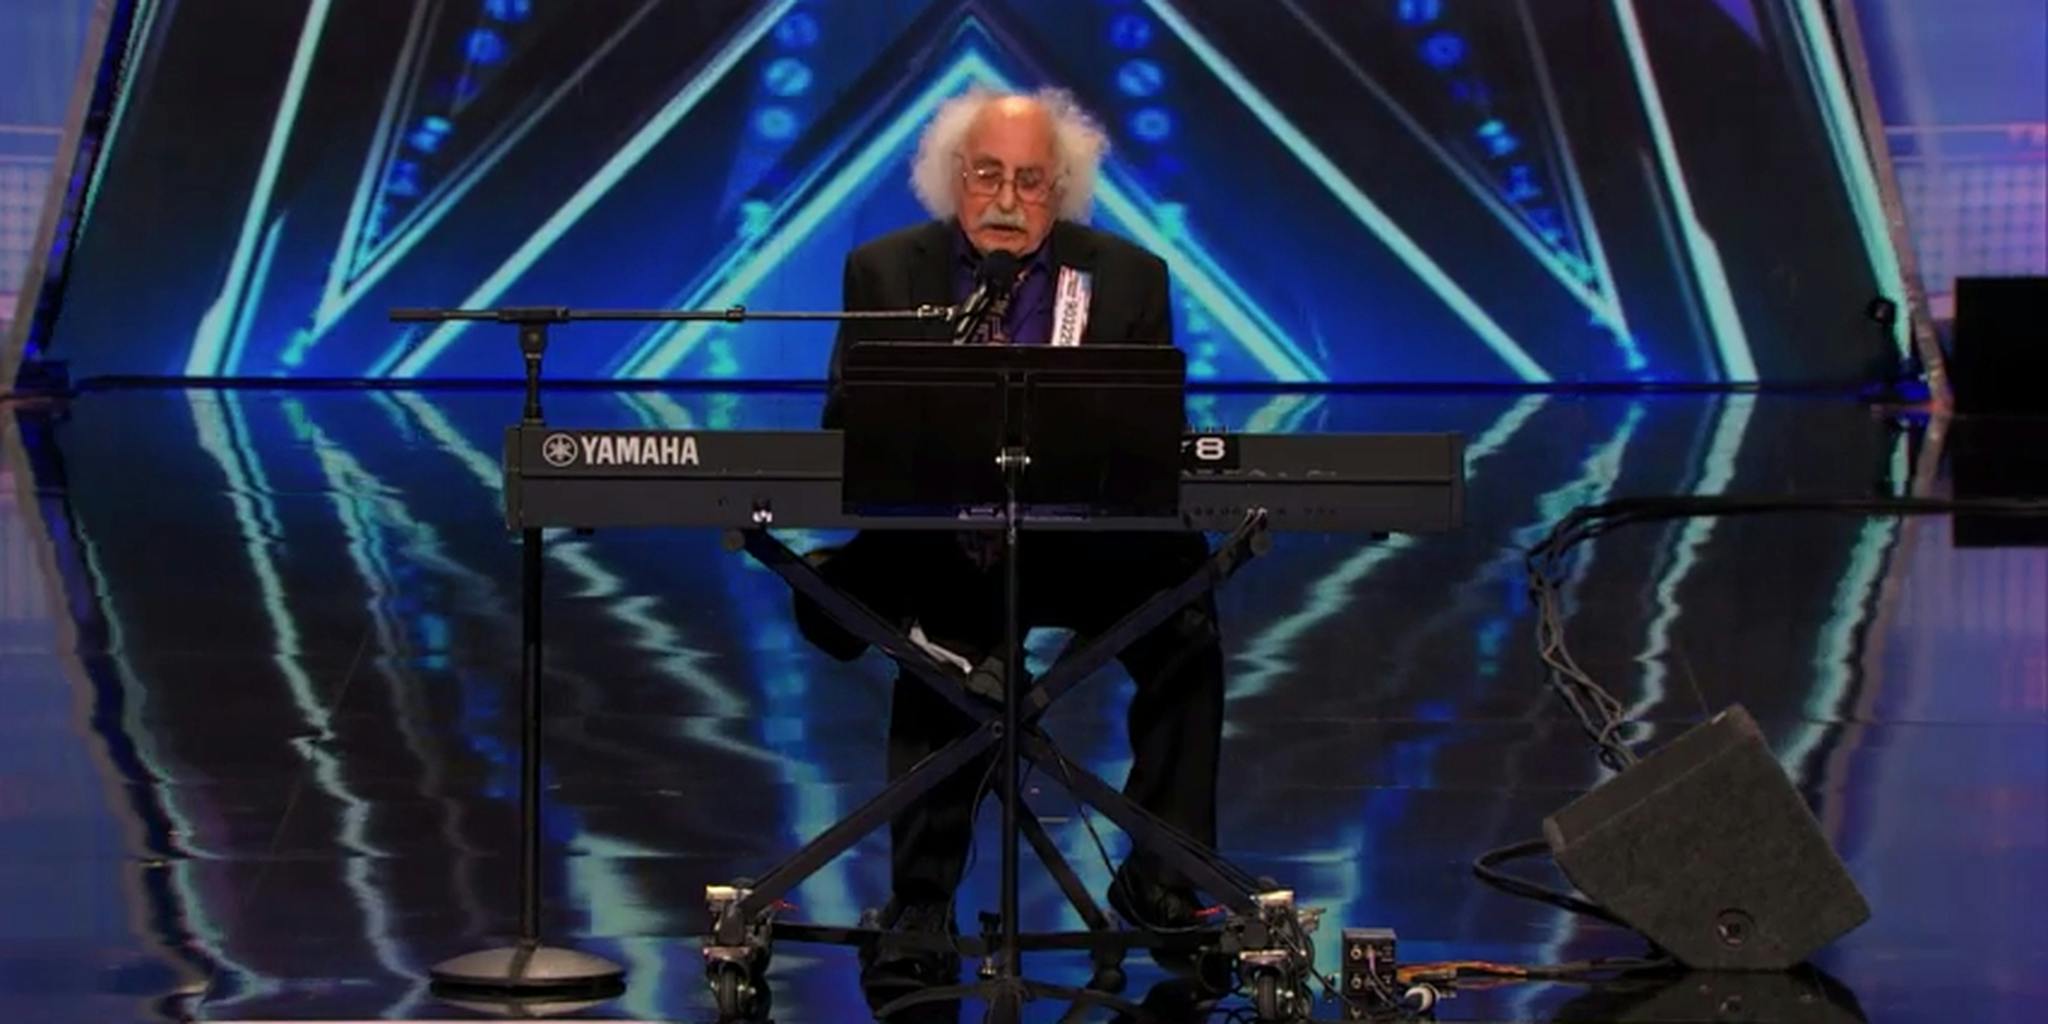 84-year-old trolls ‘America’s Got Talent’ with hilariously dirty song